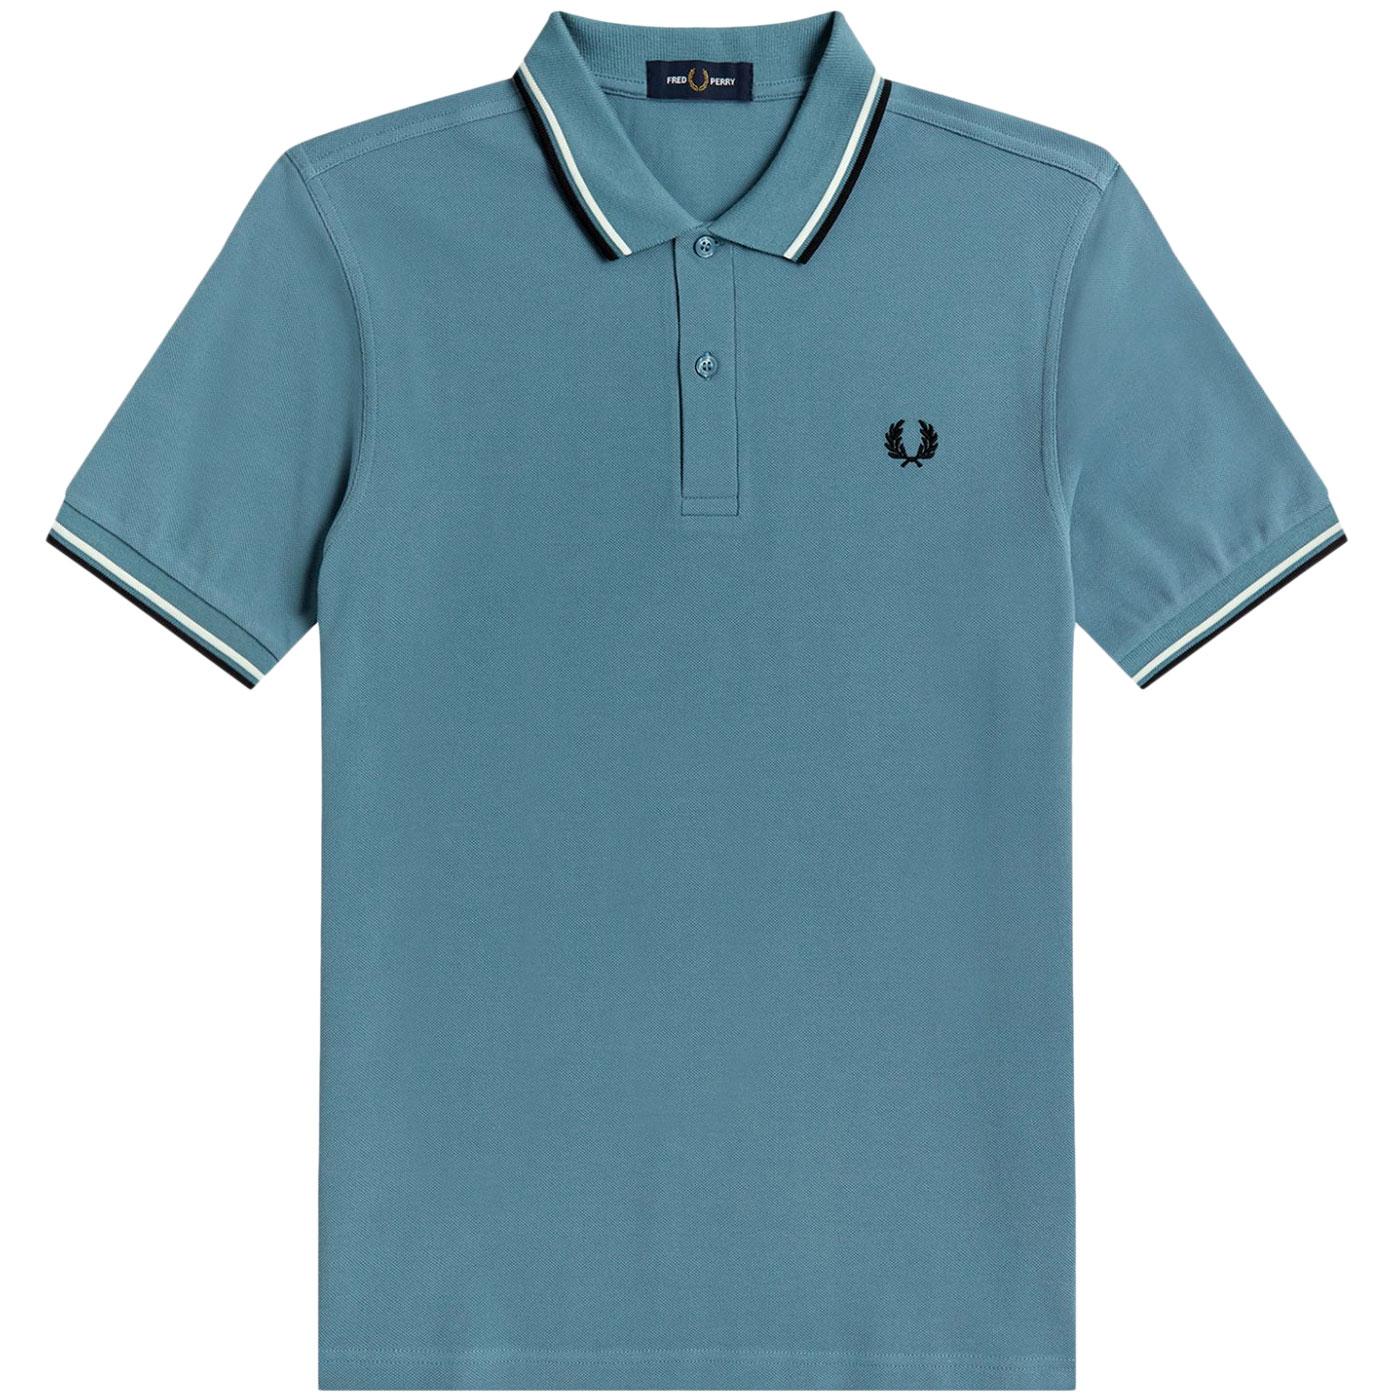 FRED PERRY M3600 Twin Tipped Mod Polo Shirt (AB)